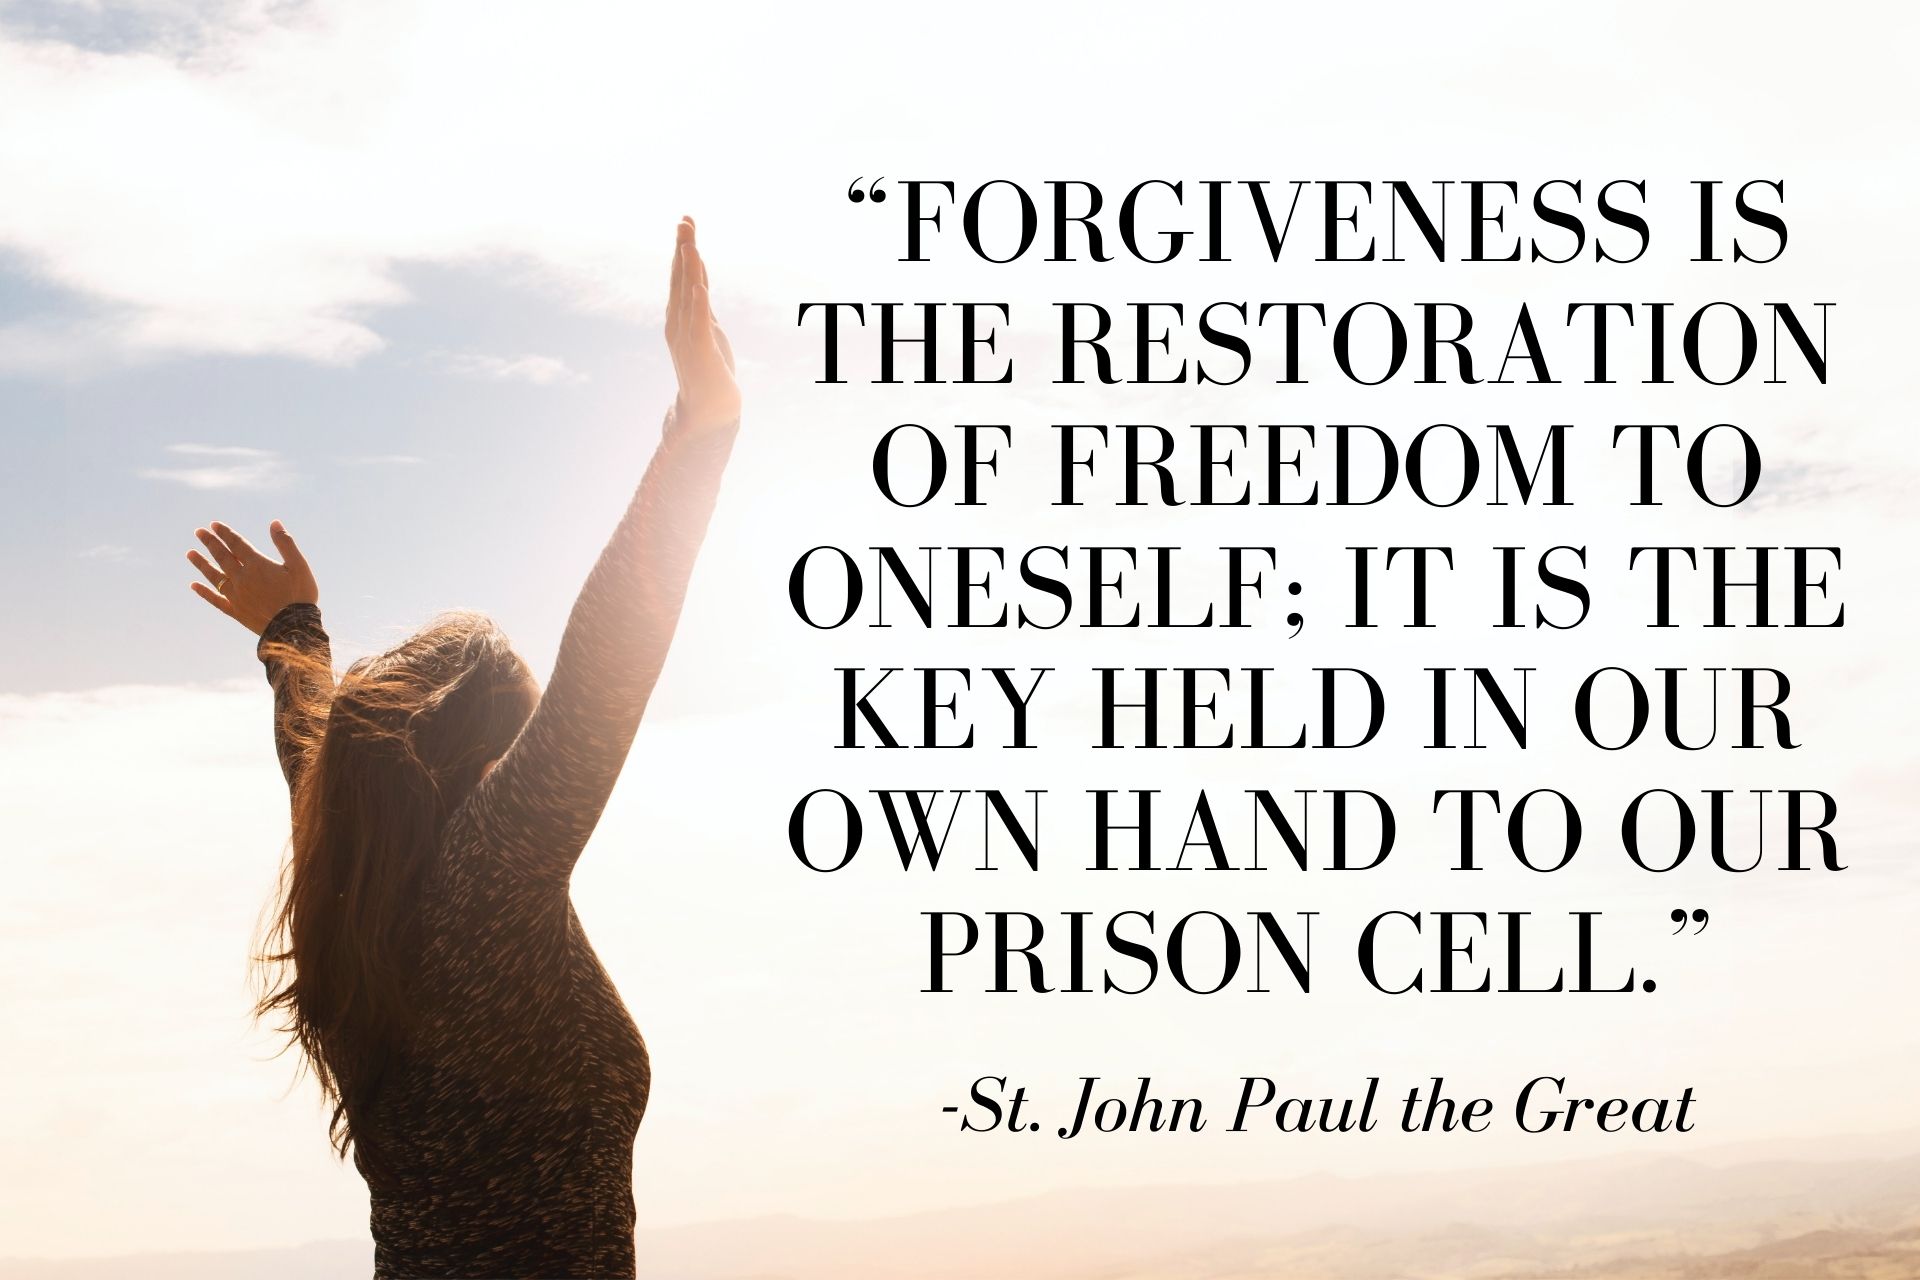 Finding Freedom in Forgiveness - This I Believe